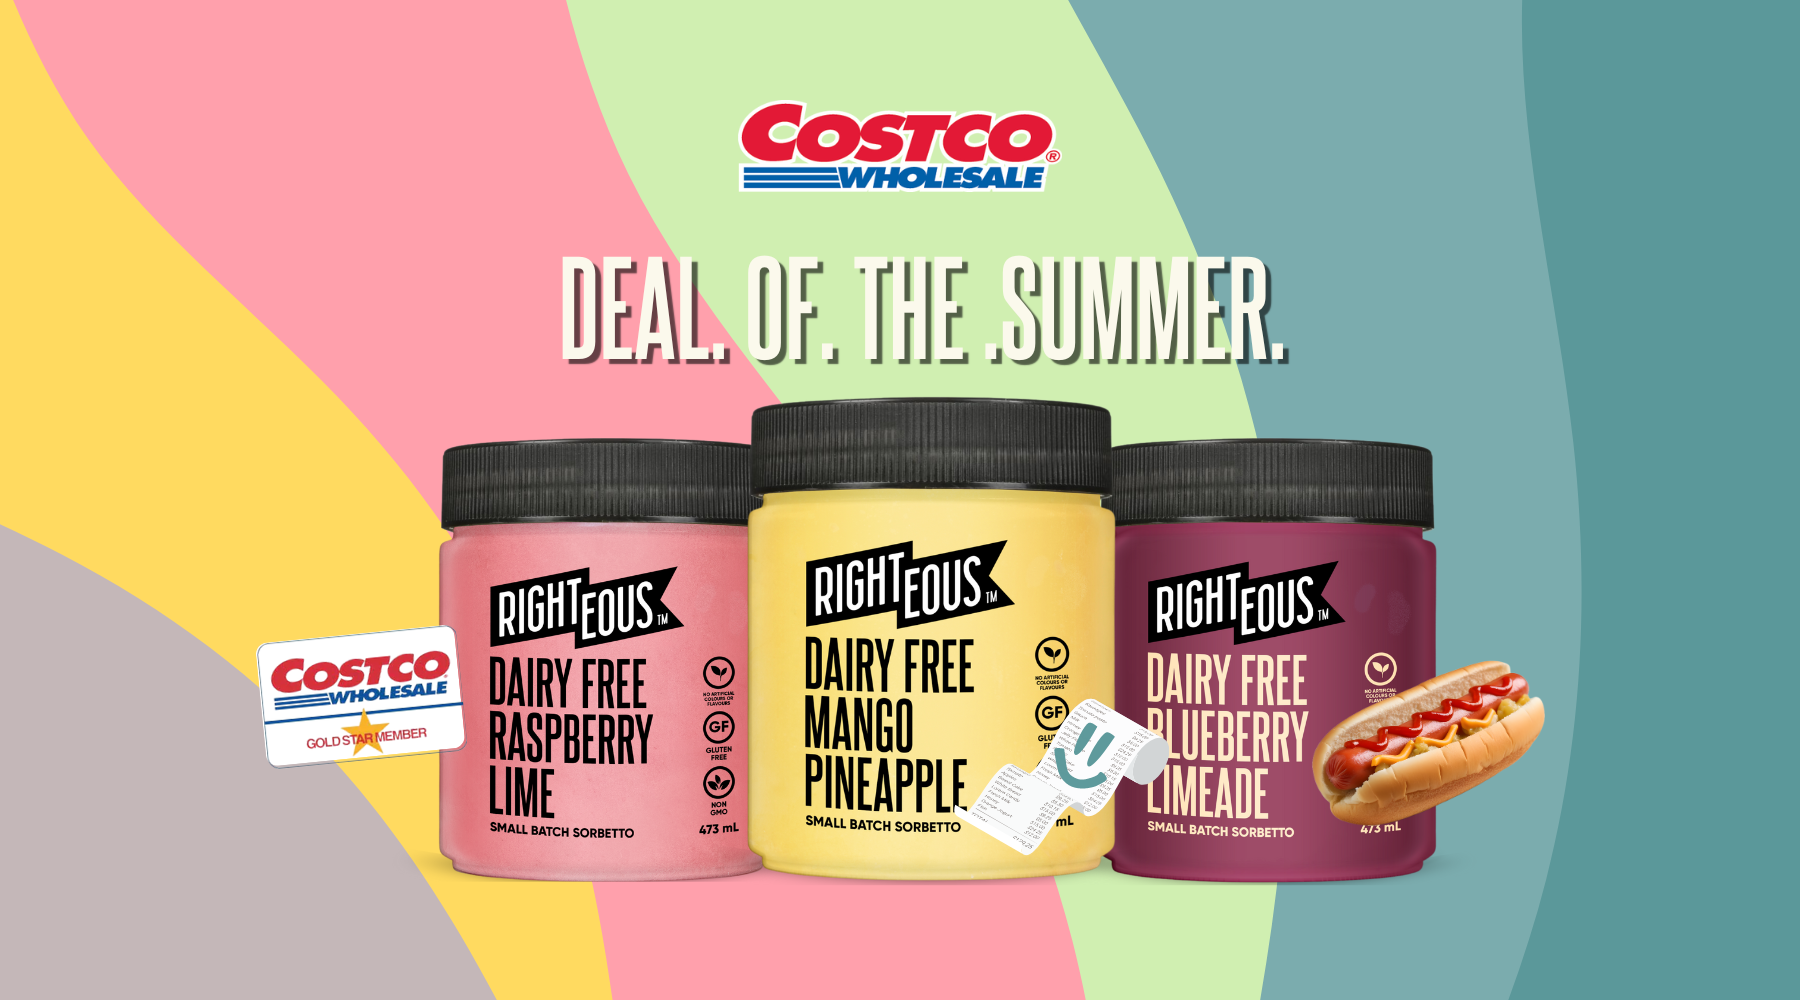 Righteous Now Available at Costco for the Deal of the Summer.